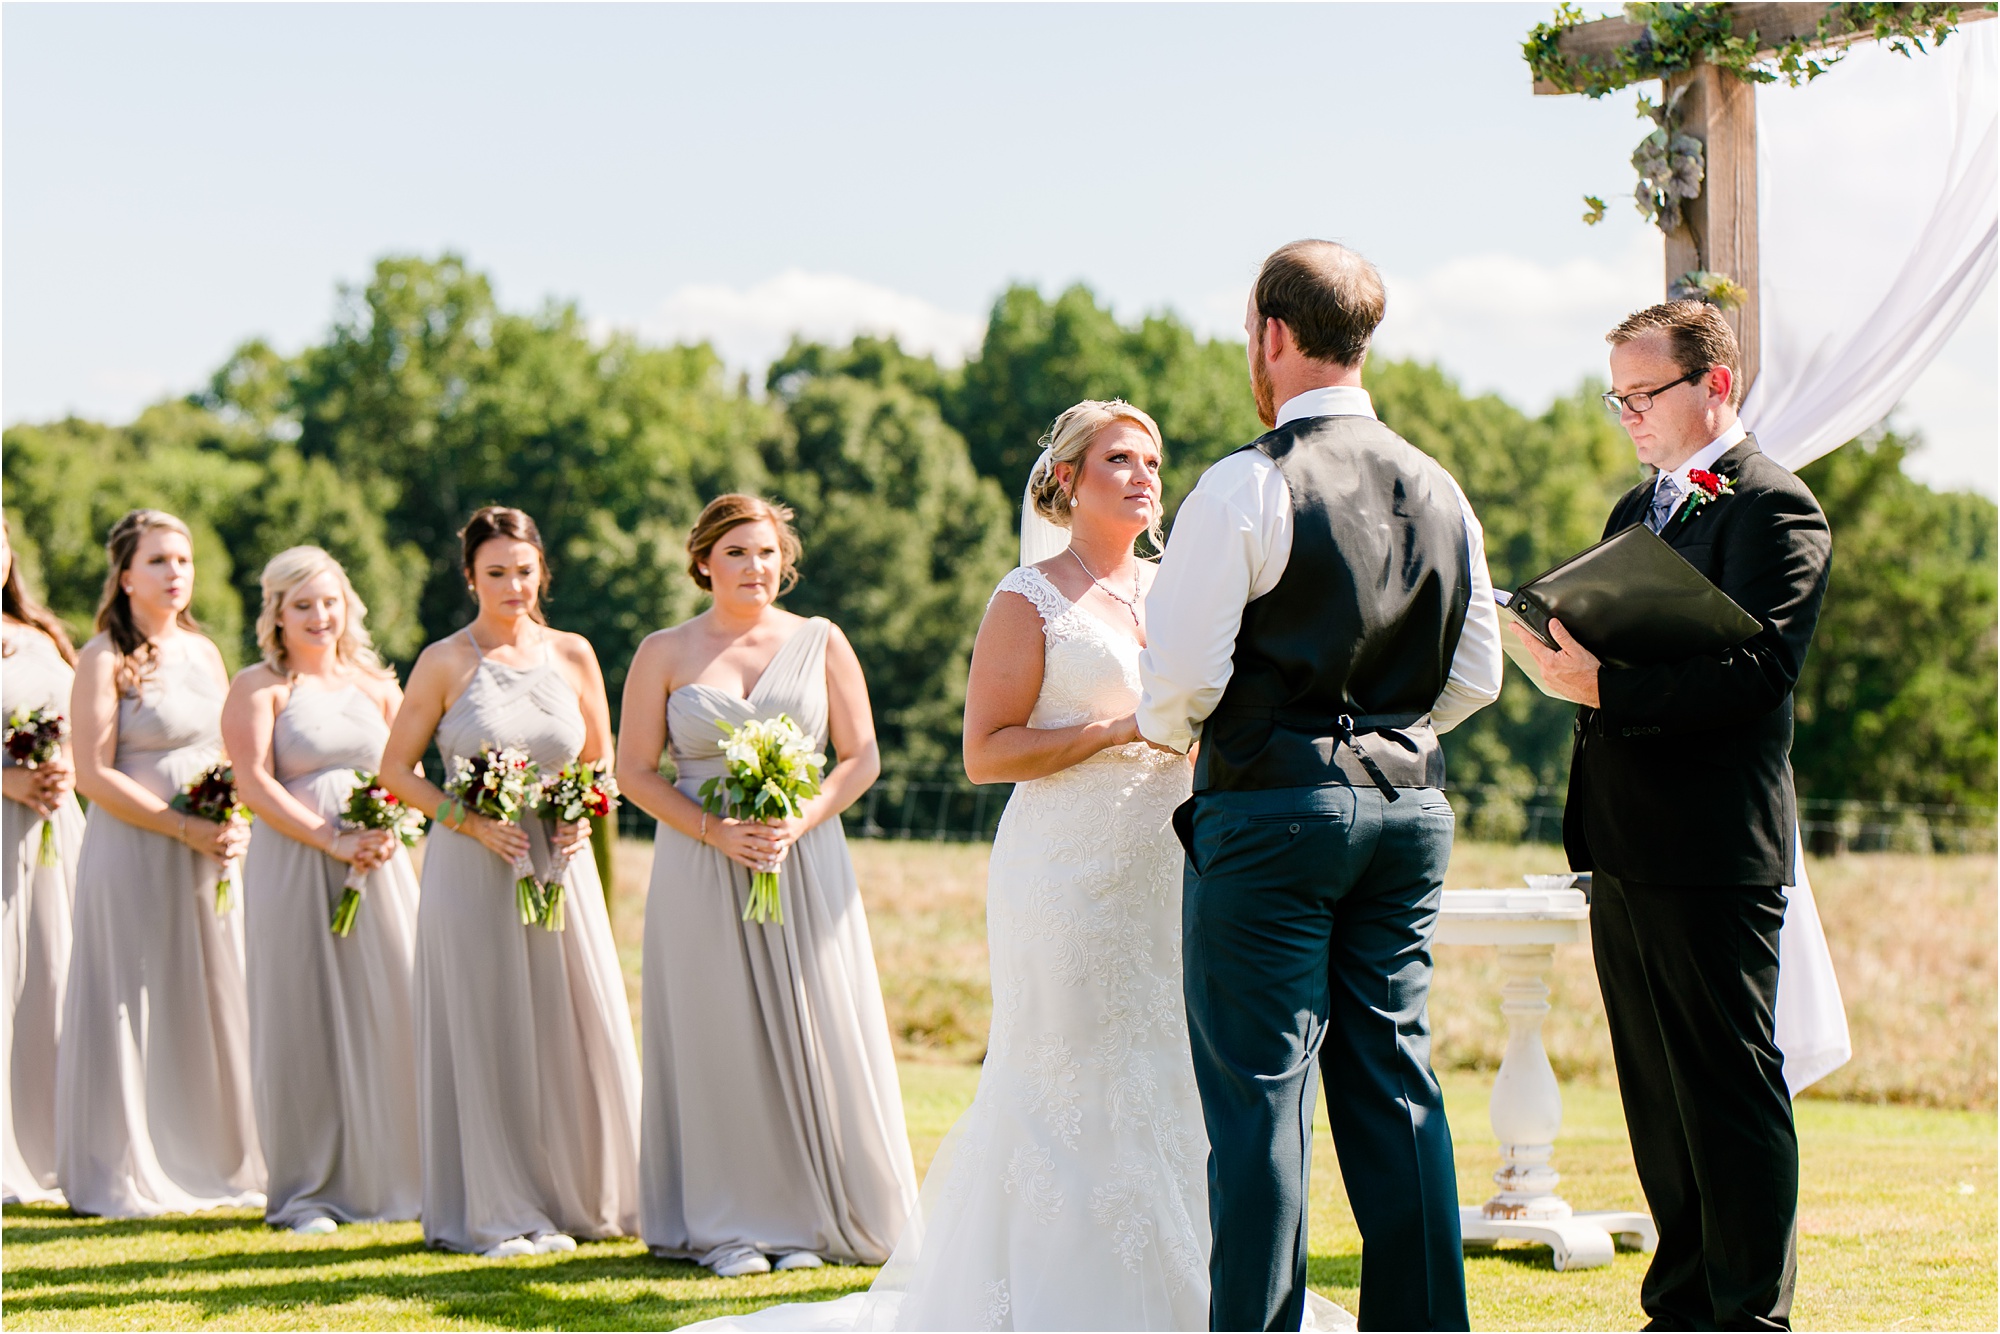 Wedding traditions & where they started / The wedding party